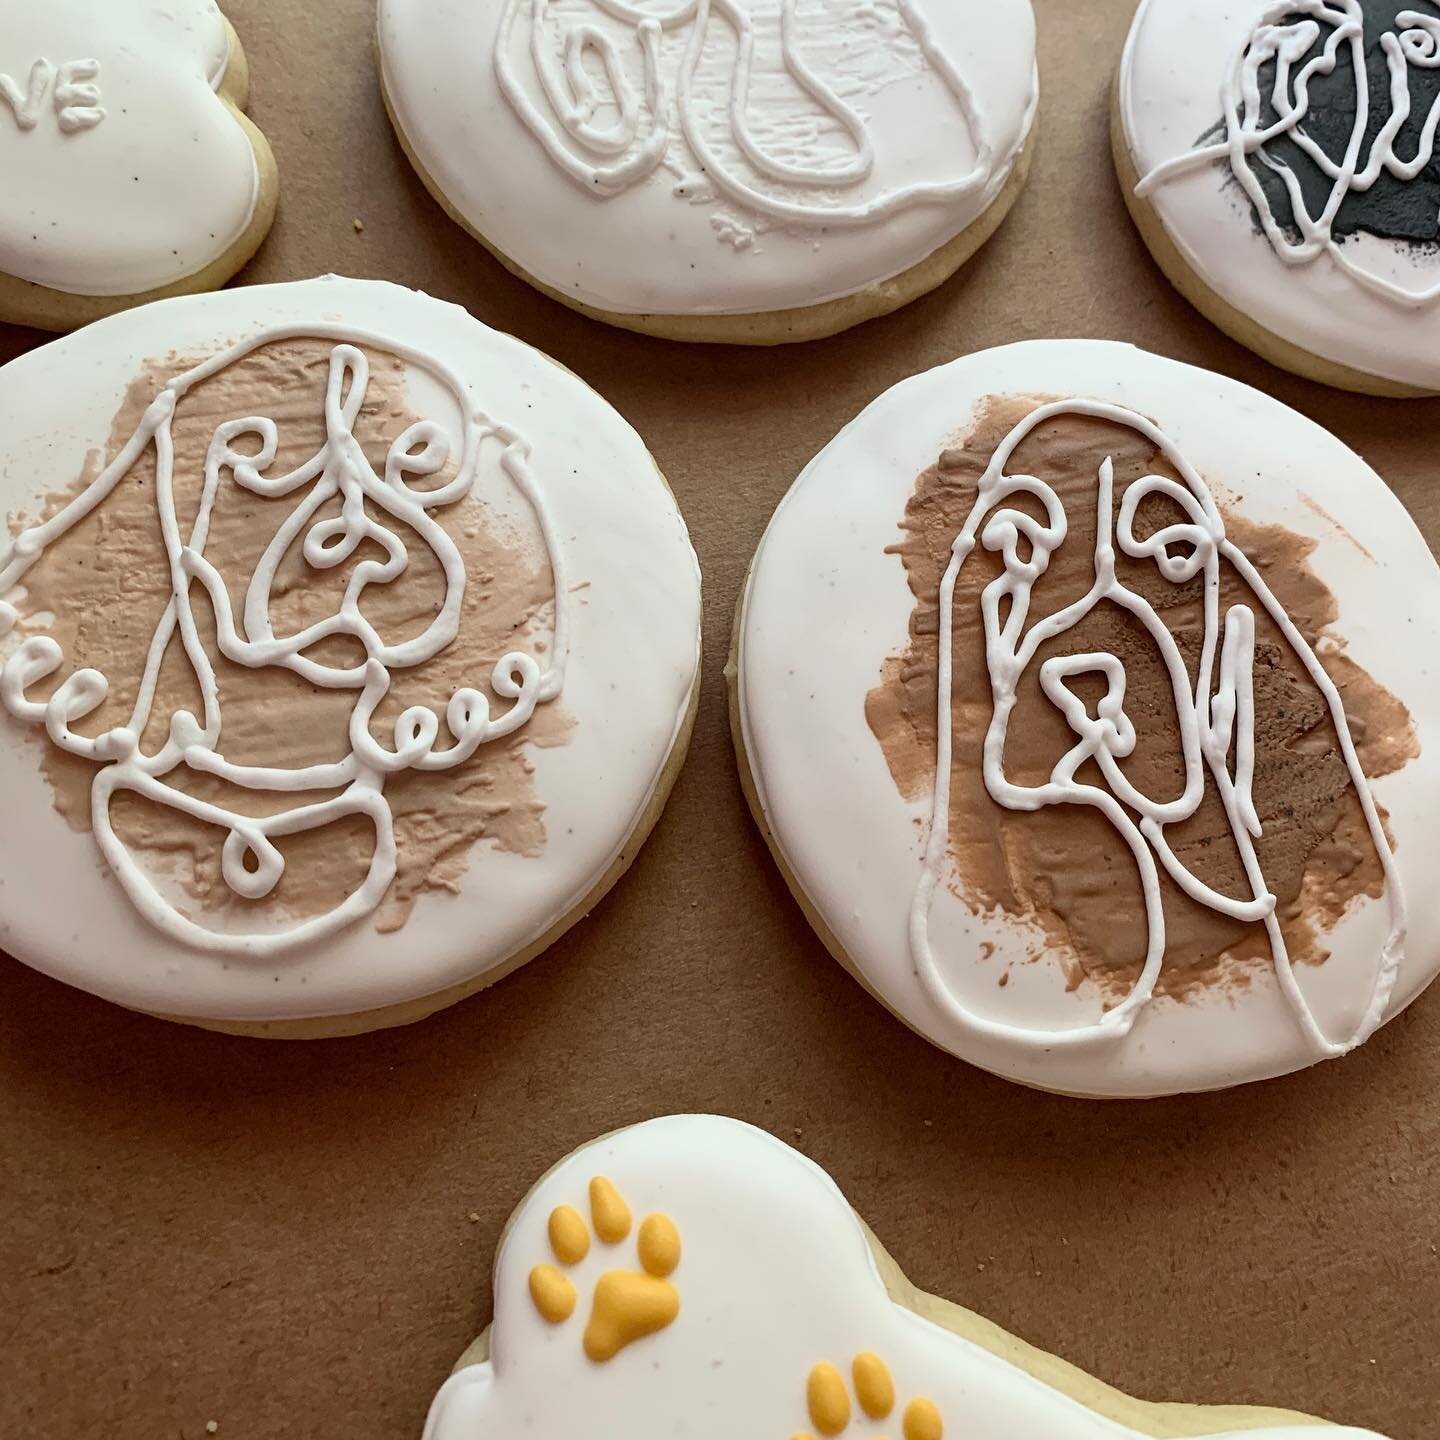 Sweet pup cookies for our favorite veterinary clinic in town. @mountcomfortvet 

#fayettevillearkansas #fayettevillear #fayettevilledogs